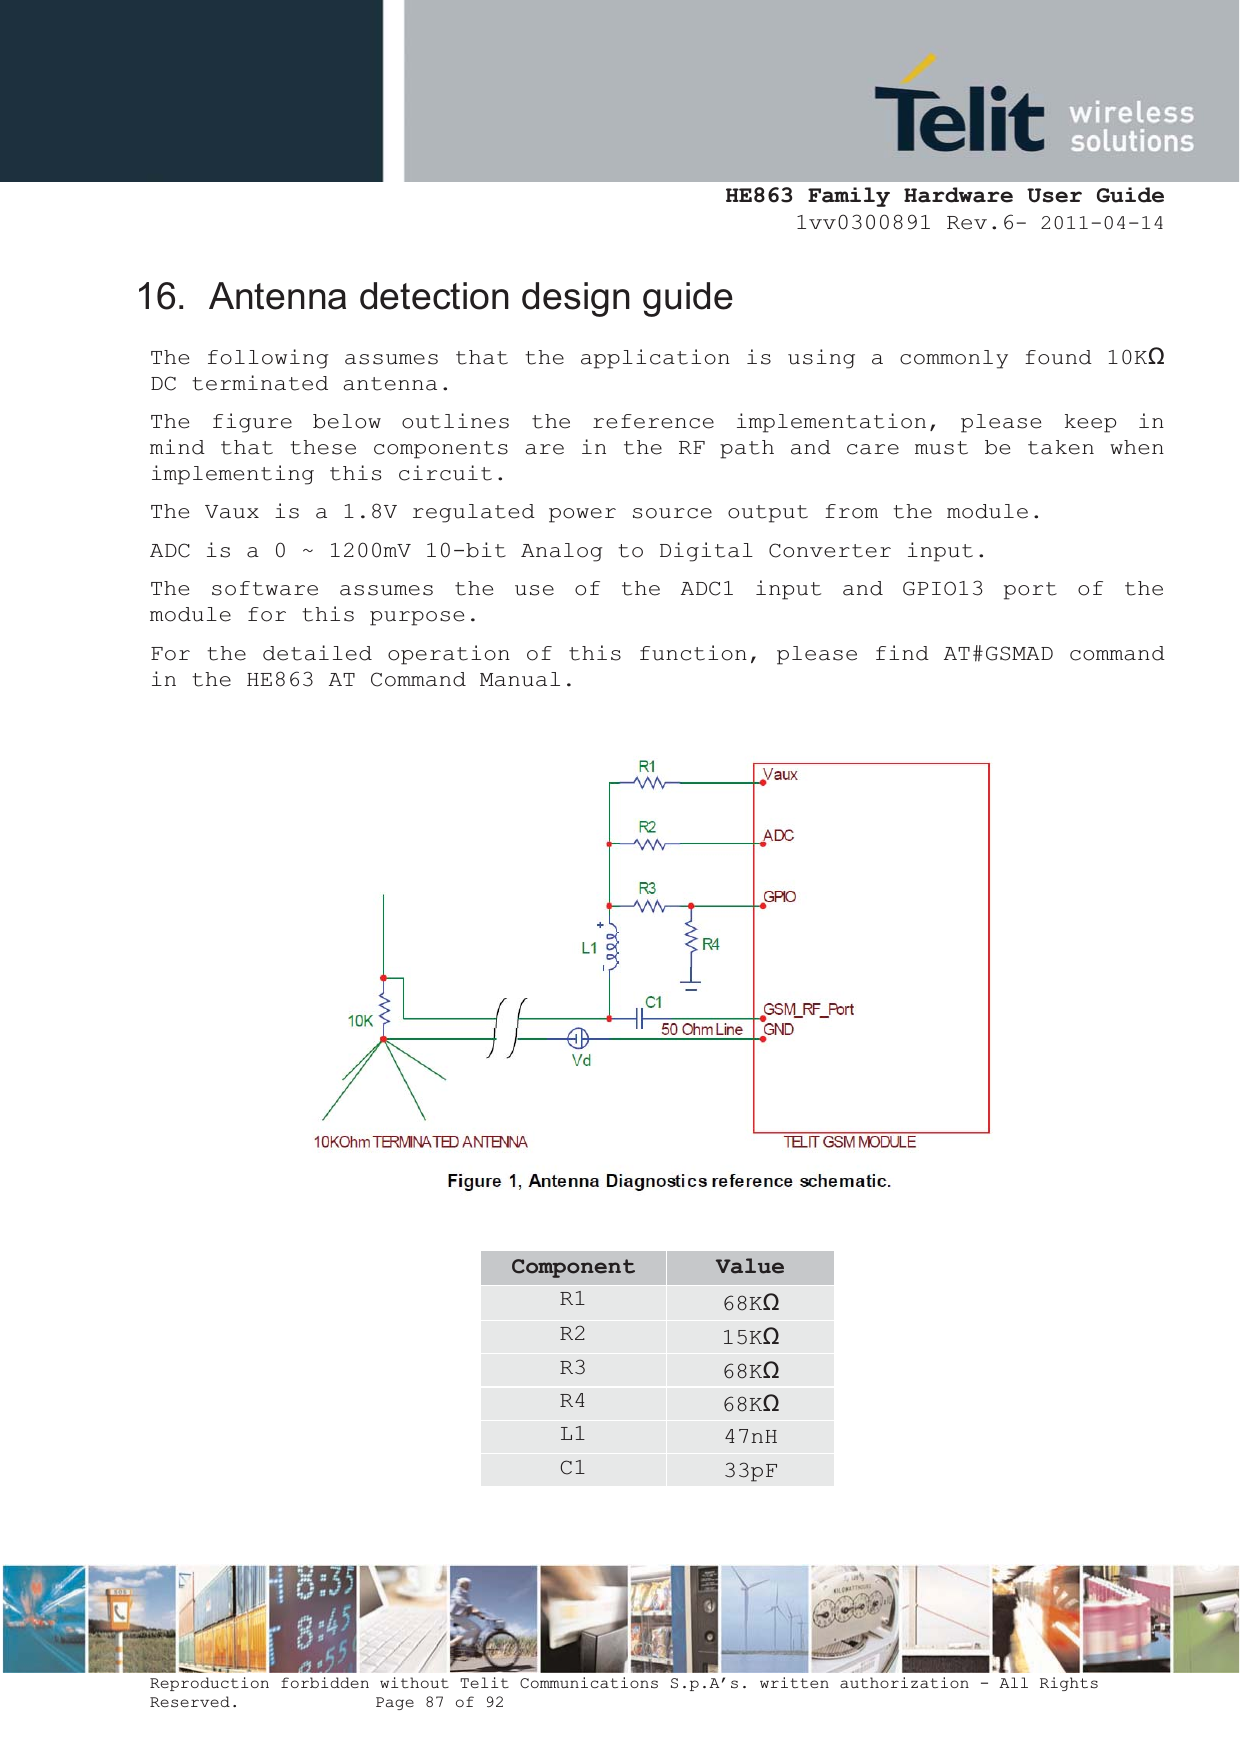  HE863 Family Hardware User Guide 1vv0300891 Rev.6- 2011-04-14    Reproduction forbidden without Telit Communications S.p.A’s. written authorization - All Rights Reserved.    Page 87 of 92  16.  Antenna detection design guide The following assumes that the application is using a commonly found 10Kȍ DC terminated antenna. The figure below outlines the reference implementation, please keep in mind that these components are in the RF path and care must be taken when implementing this circuit. The Vaux is a 1.8V regulated power source output from the module. ADC is a 0 ~ 1200mV 10-bit Analog to Digital Converter input. The software assumes the use of the ADC1 input and GPIO13 port of the module for this purpose. For the detailed operation of this function, please find AT#GSMAD command in the HE863 AT Command Manual.    Component ValueR1  68Kȍ R2  15Kȍ R3  68Kȍ R4  68Kȍ L1  47nH C1  33pF  